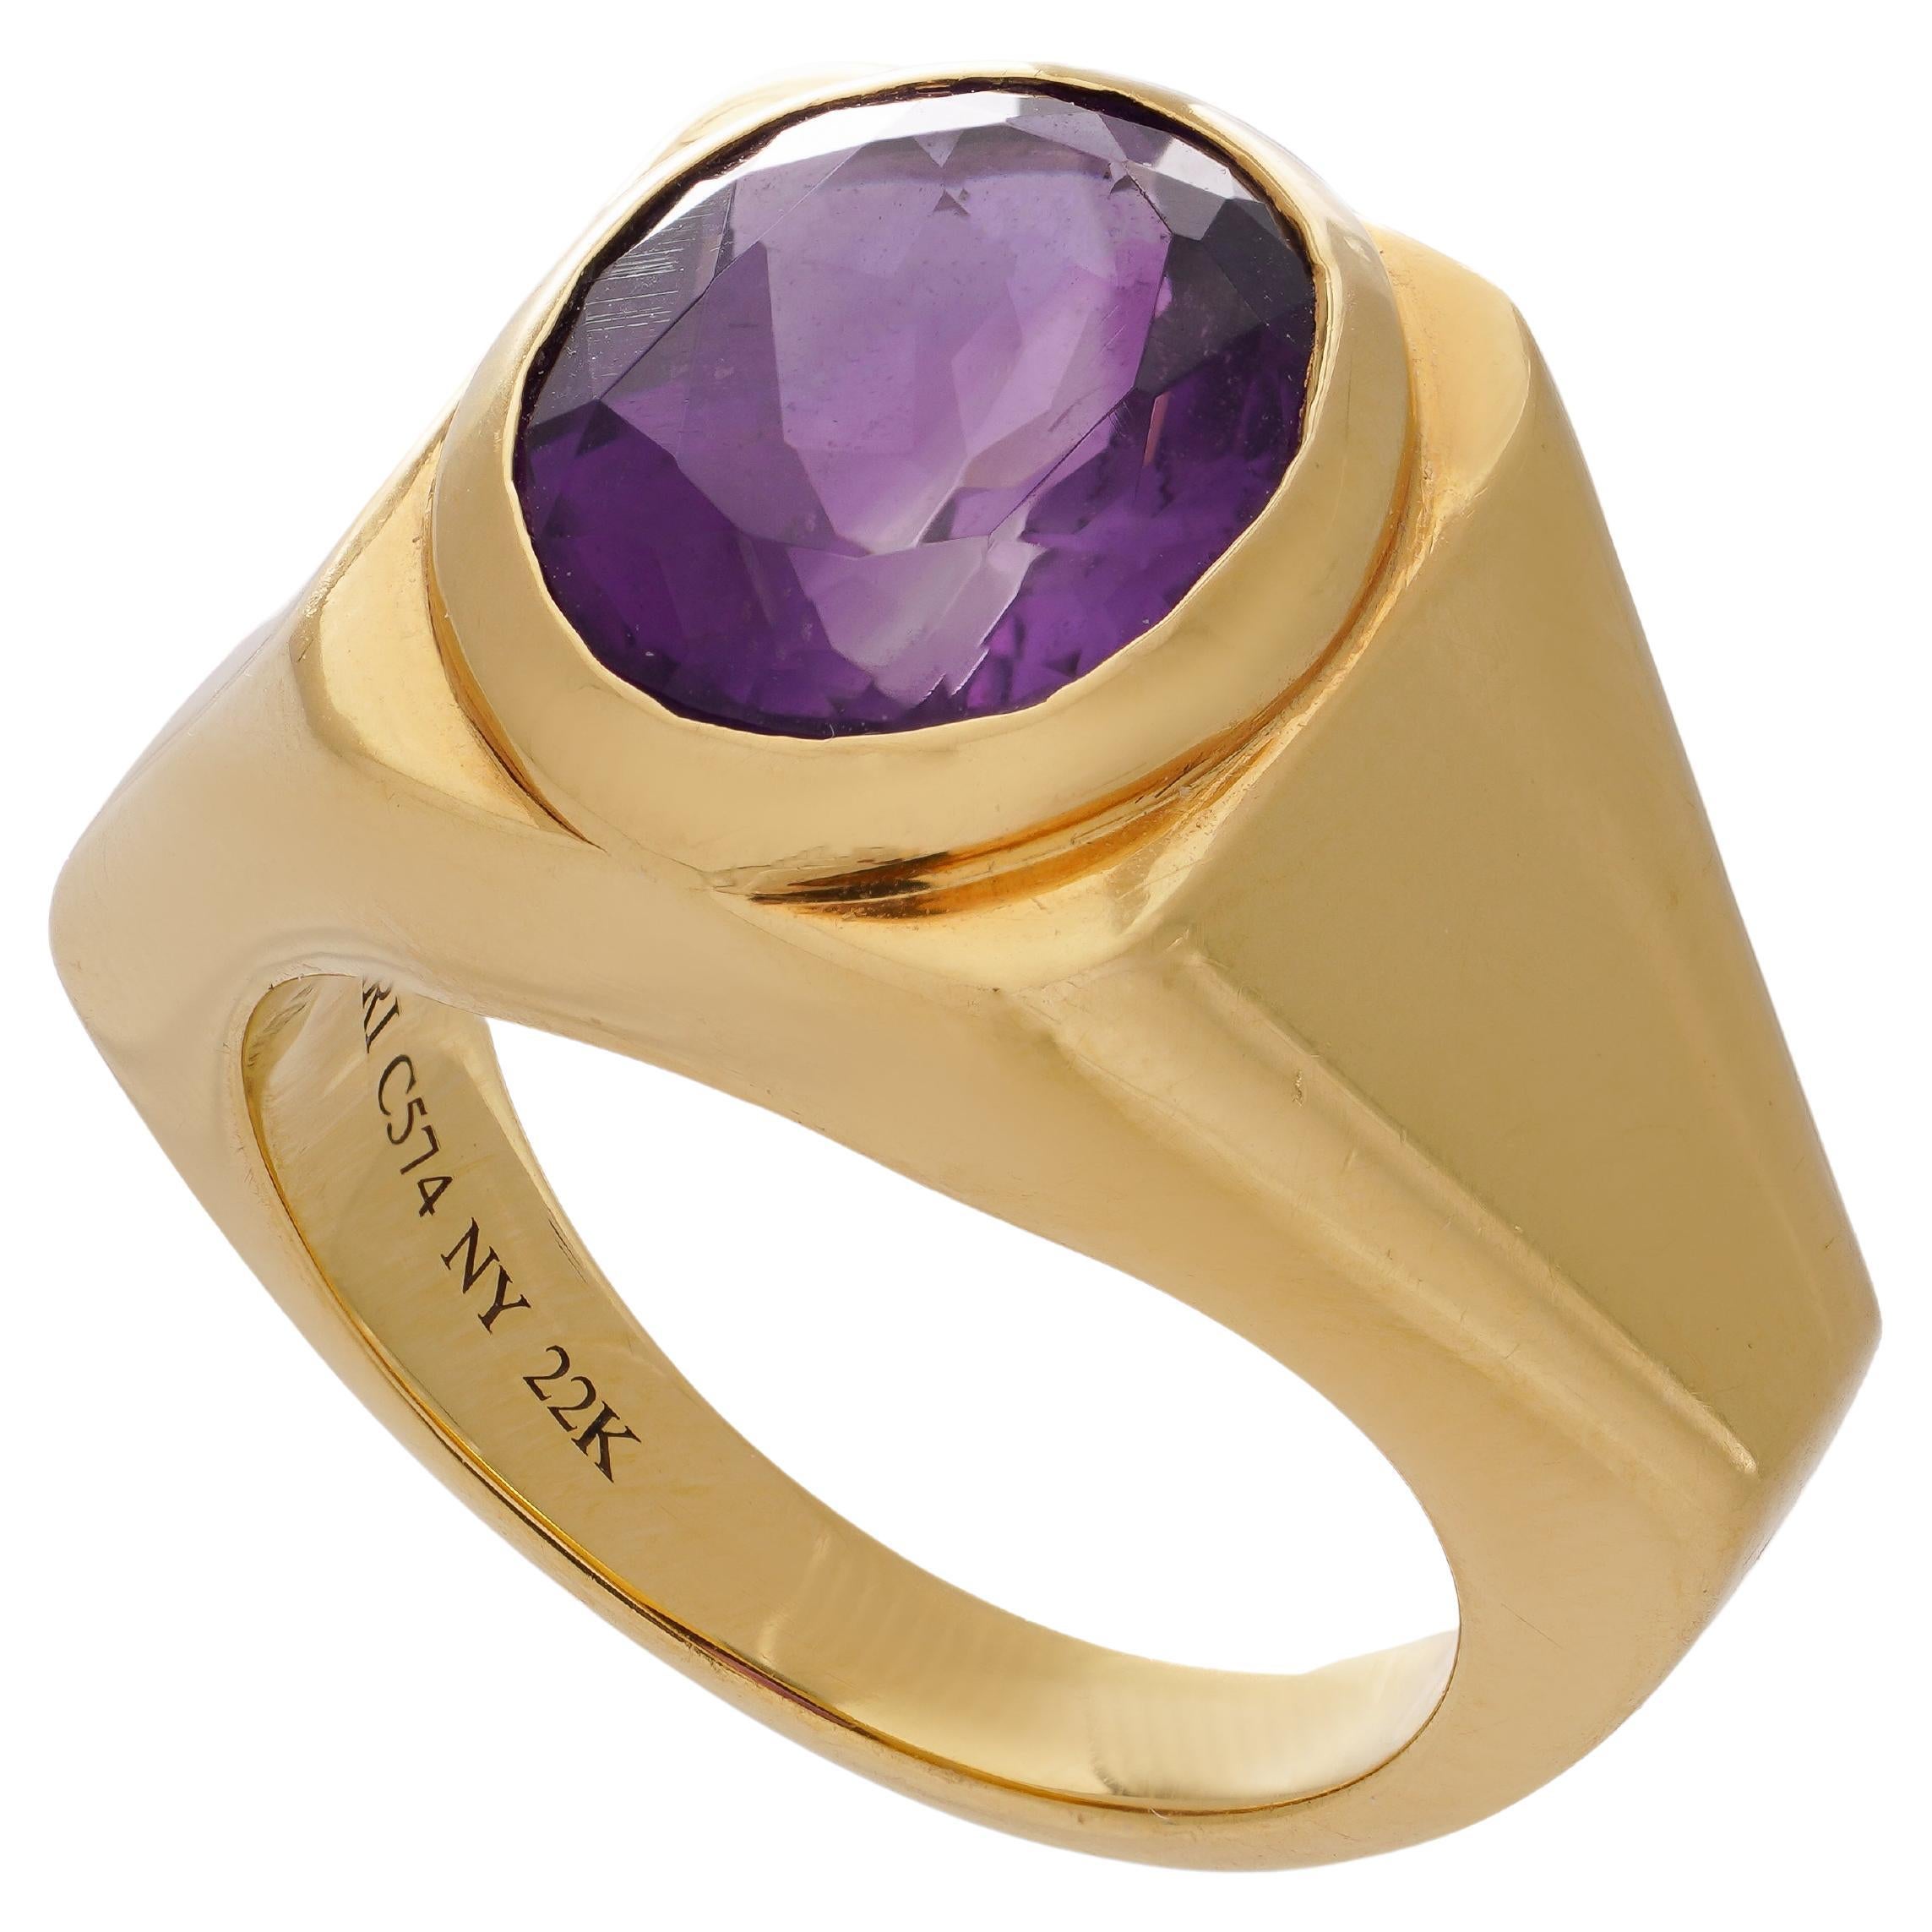 Bvlgari 22kt. yellow gold geometric band ring set with an oval-cut amethyst